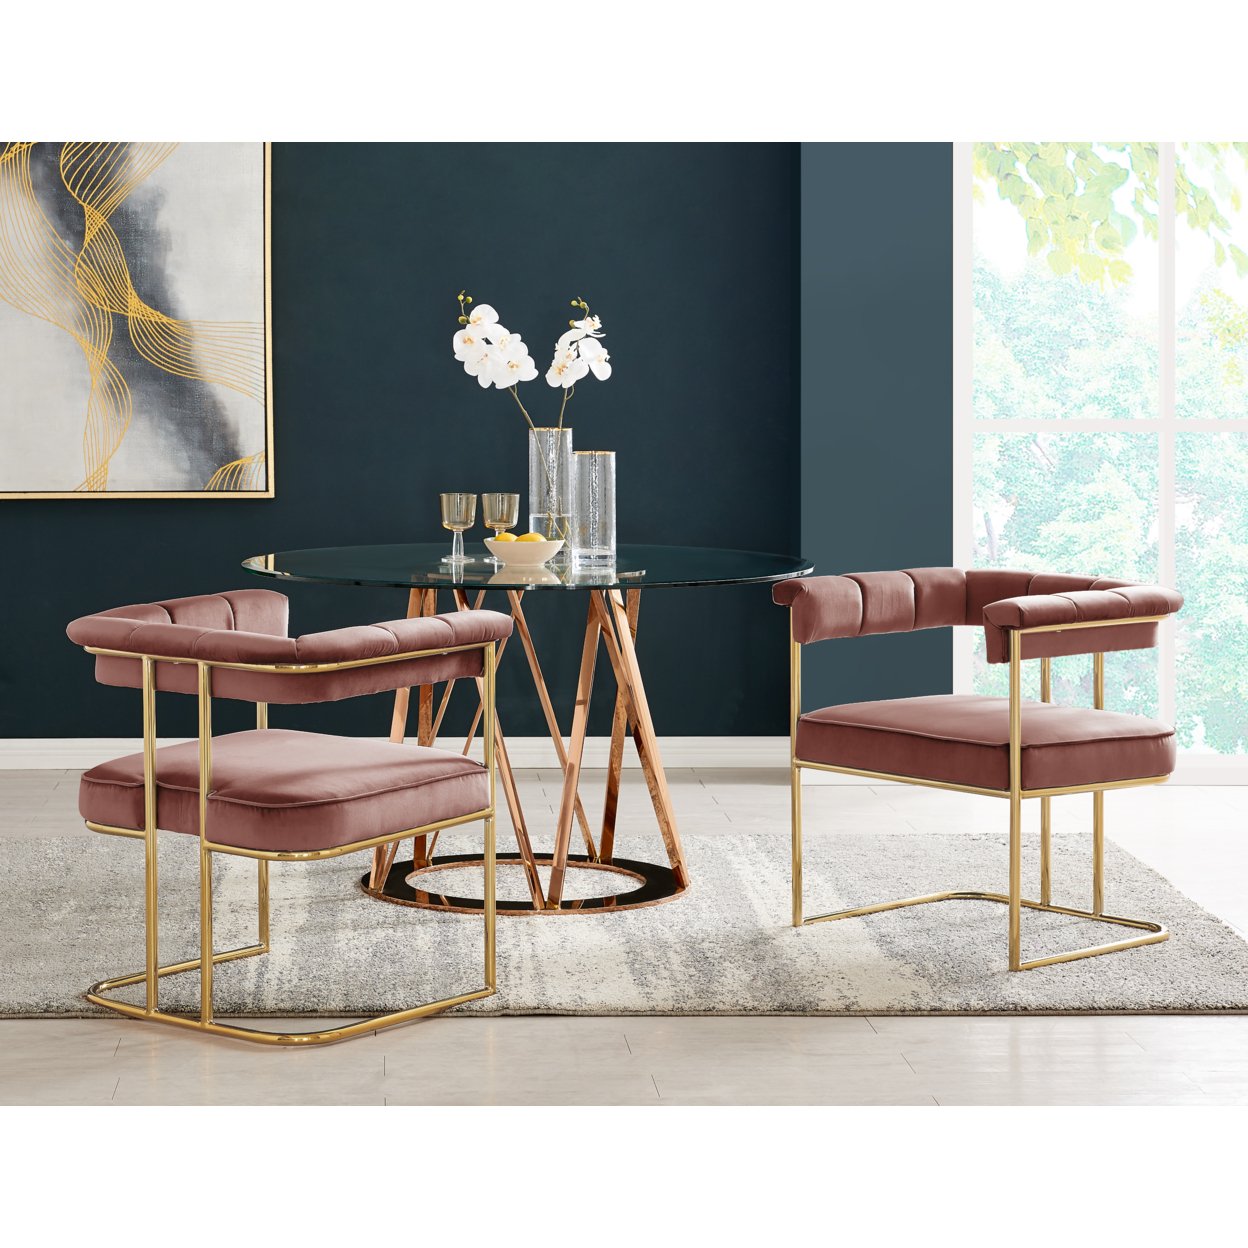 Iconic Home Pierce Dining Side Chair Velvet Upholstery Gold Plated (1 Piece) - Blush